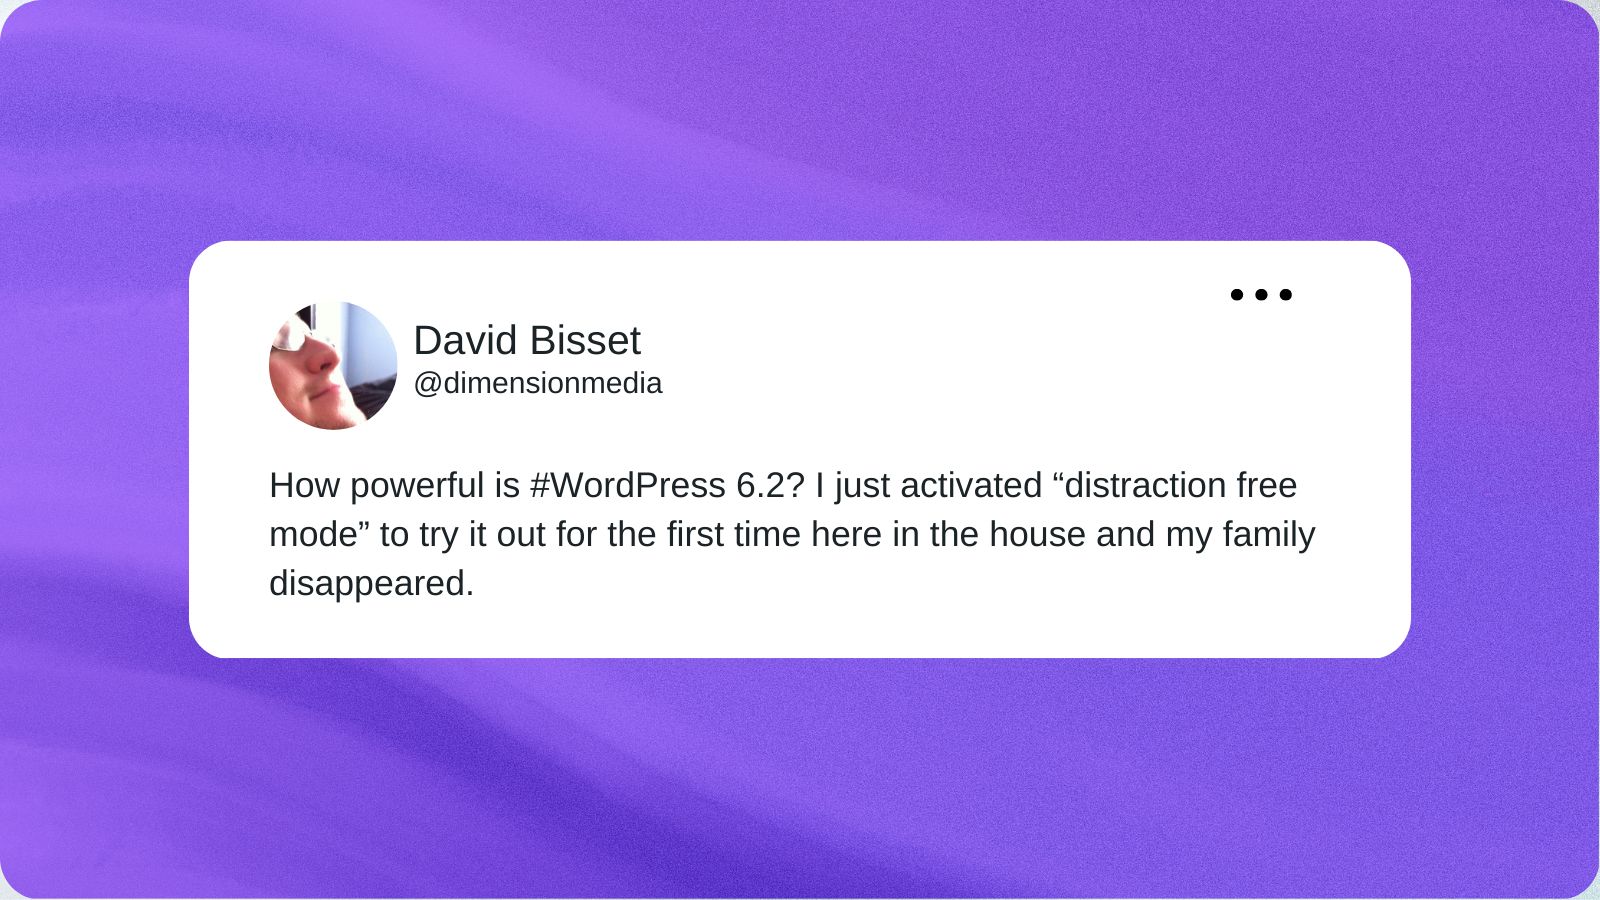 A tweet from David Bissett that reads “How powerful is #WordPress 6.2? I just activated “distraction free mode” to try it out for the first time here in the house and my family disappeared.”